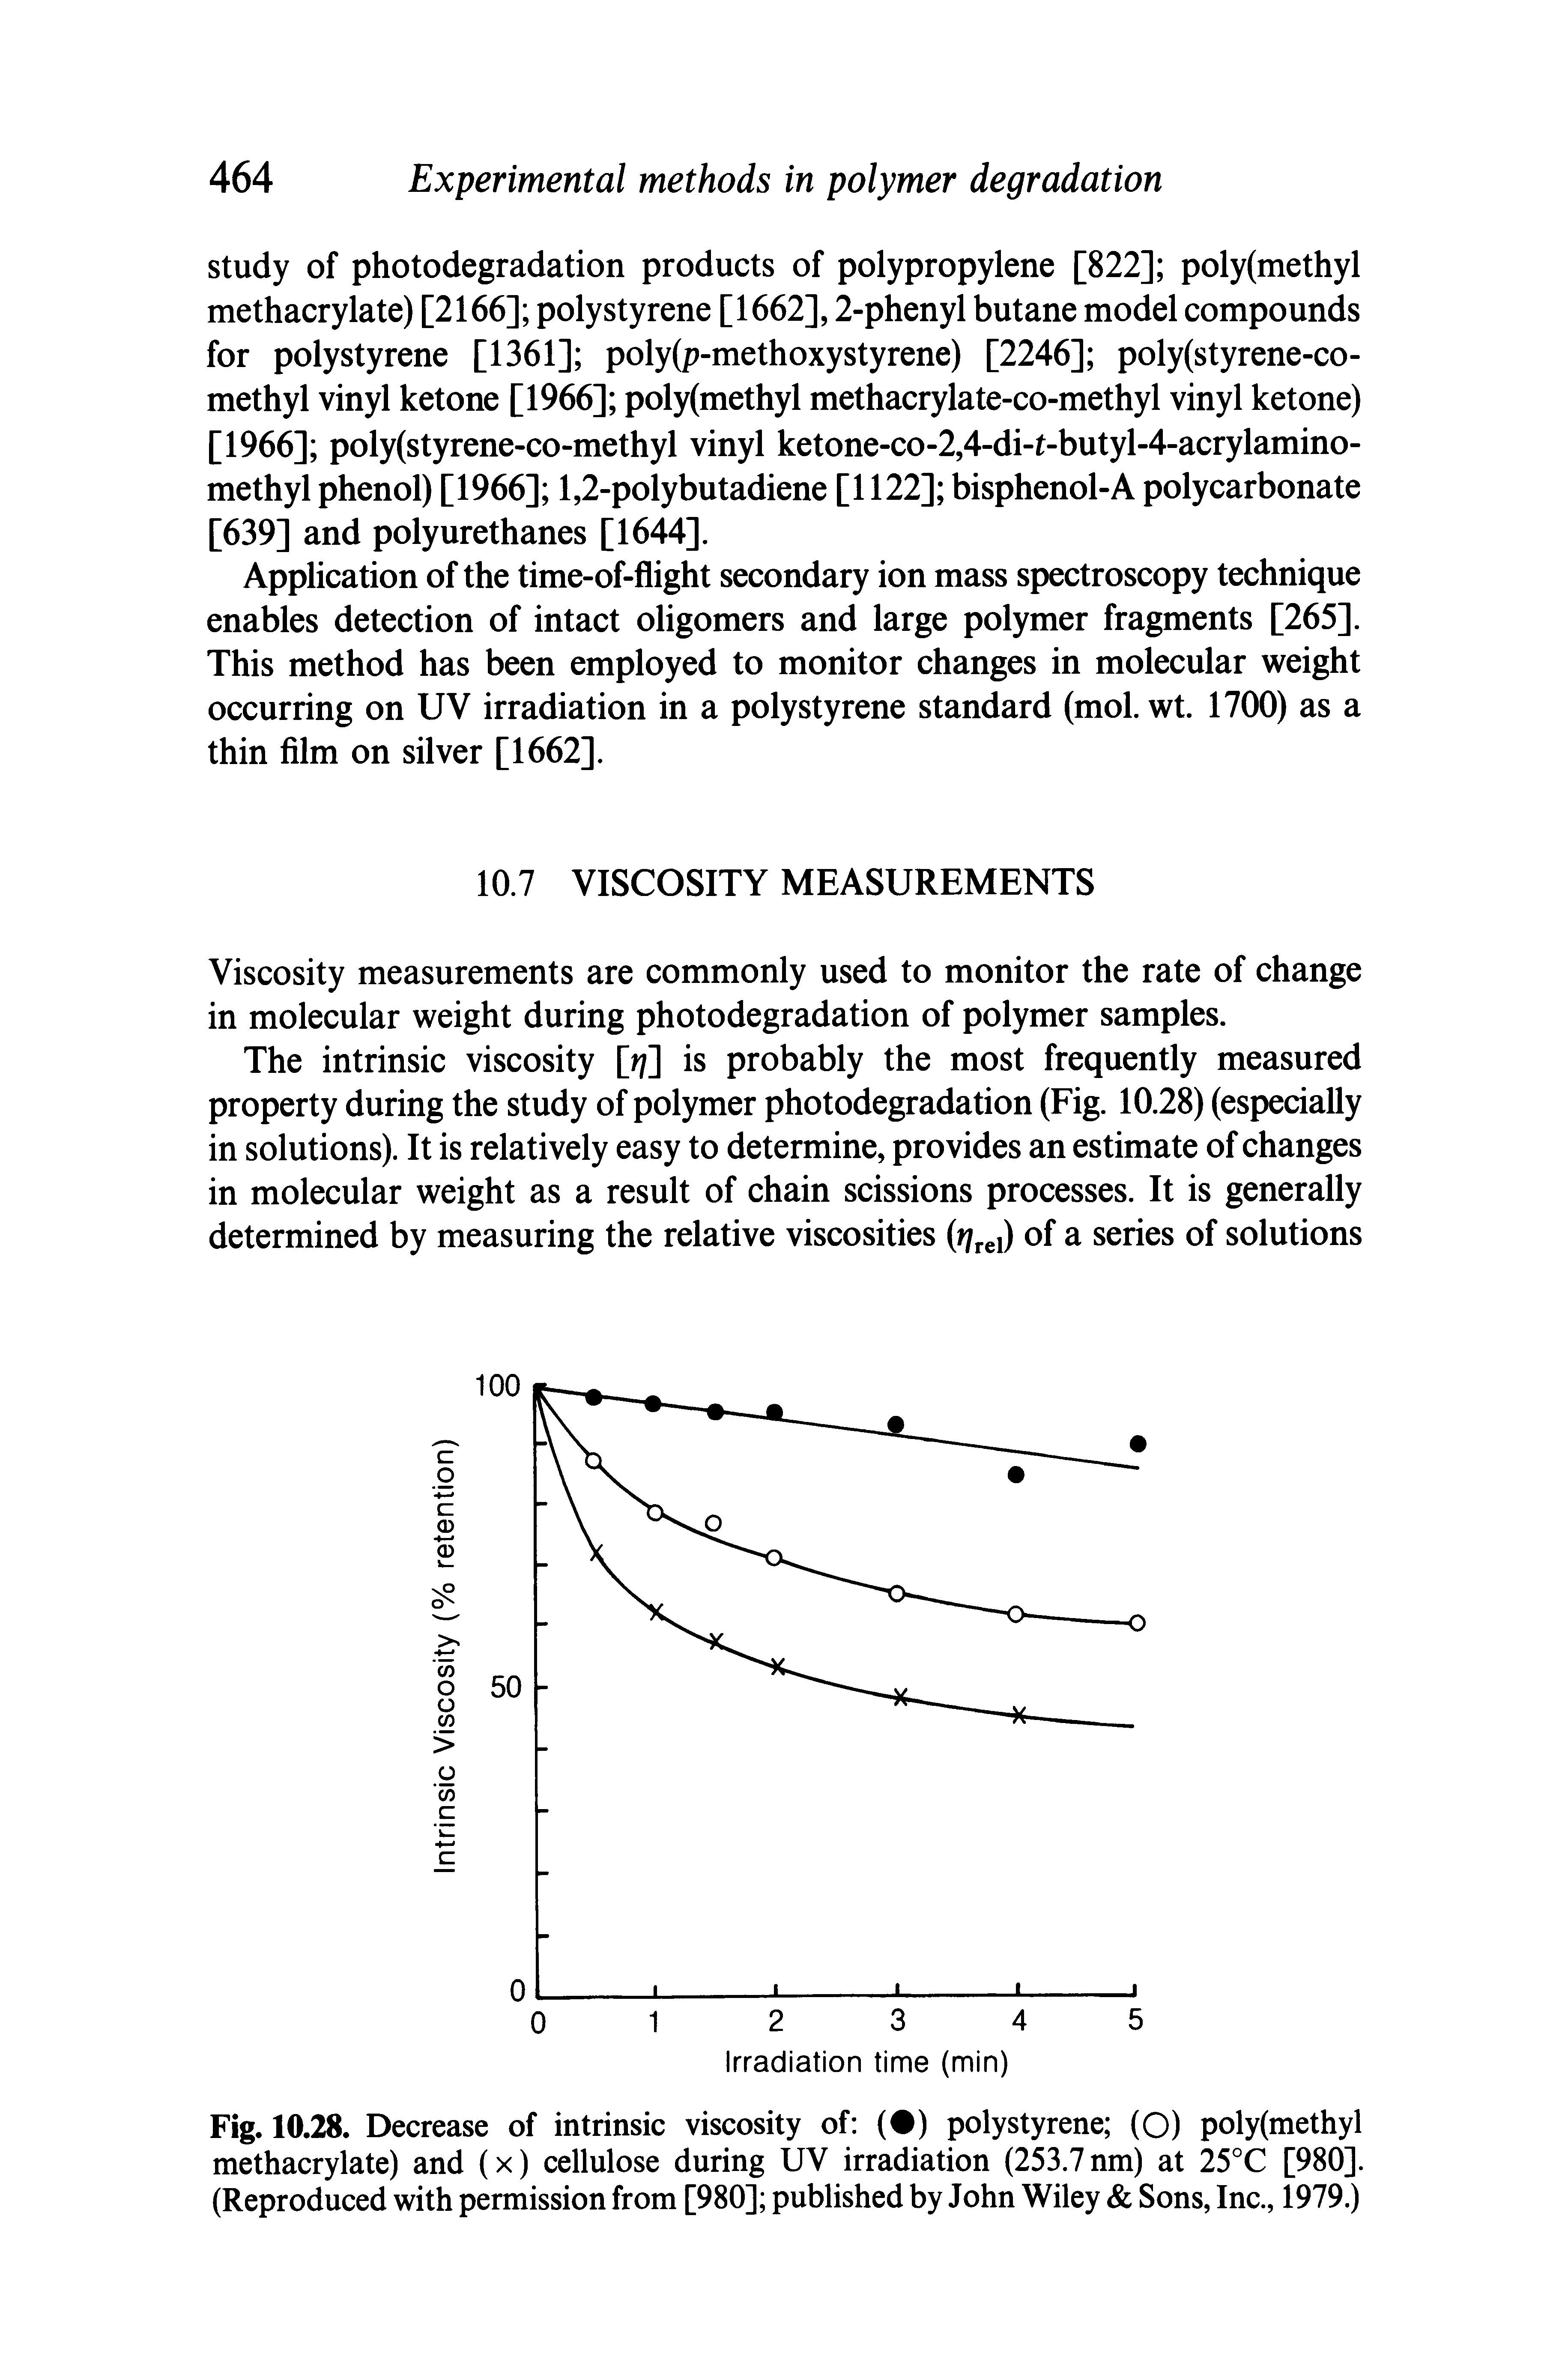 Fig. 10.28. Decrease of intrinsic viscosity of ( ) polystyrene (O) poly(methyl methacrylate) and (x) cellulose during UV irradiation (253.7nm) at 25°C [980]. (Reproduced with permission from [980] published by John Wiley Sons, Inc., 1979.)...